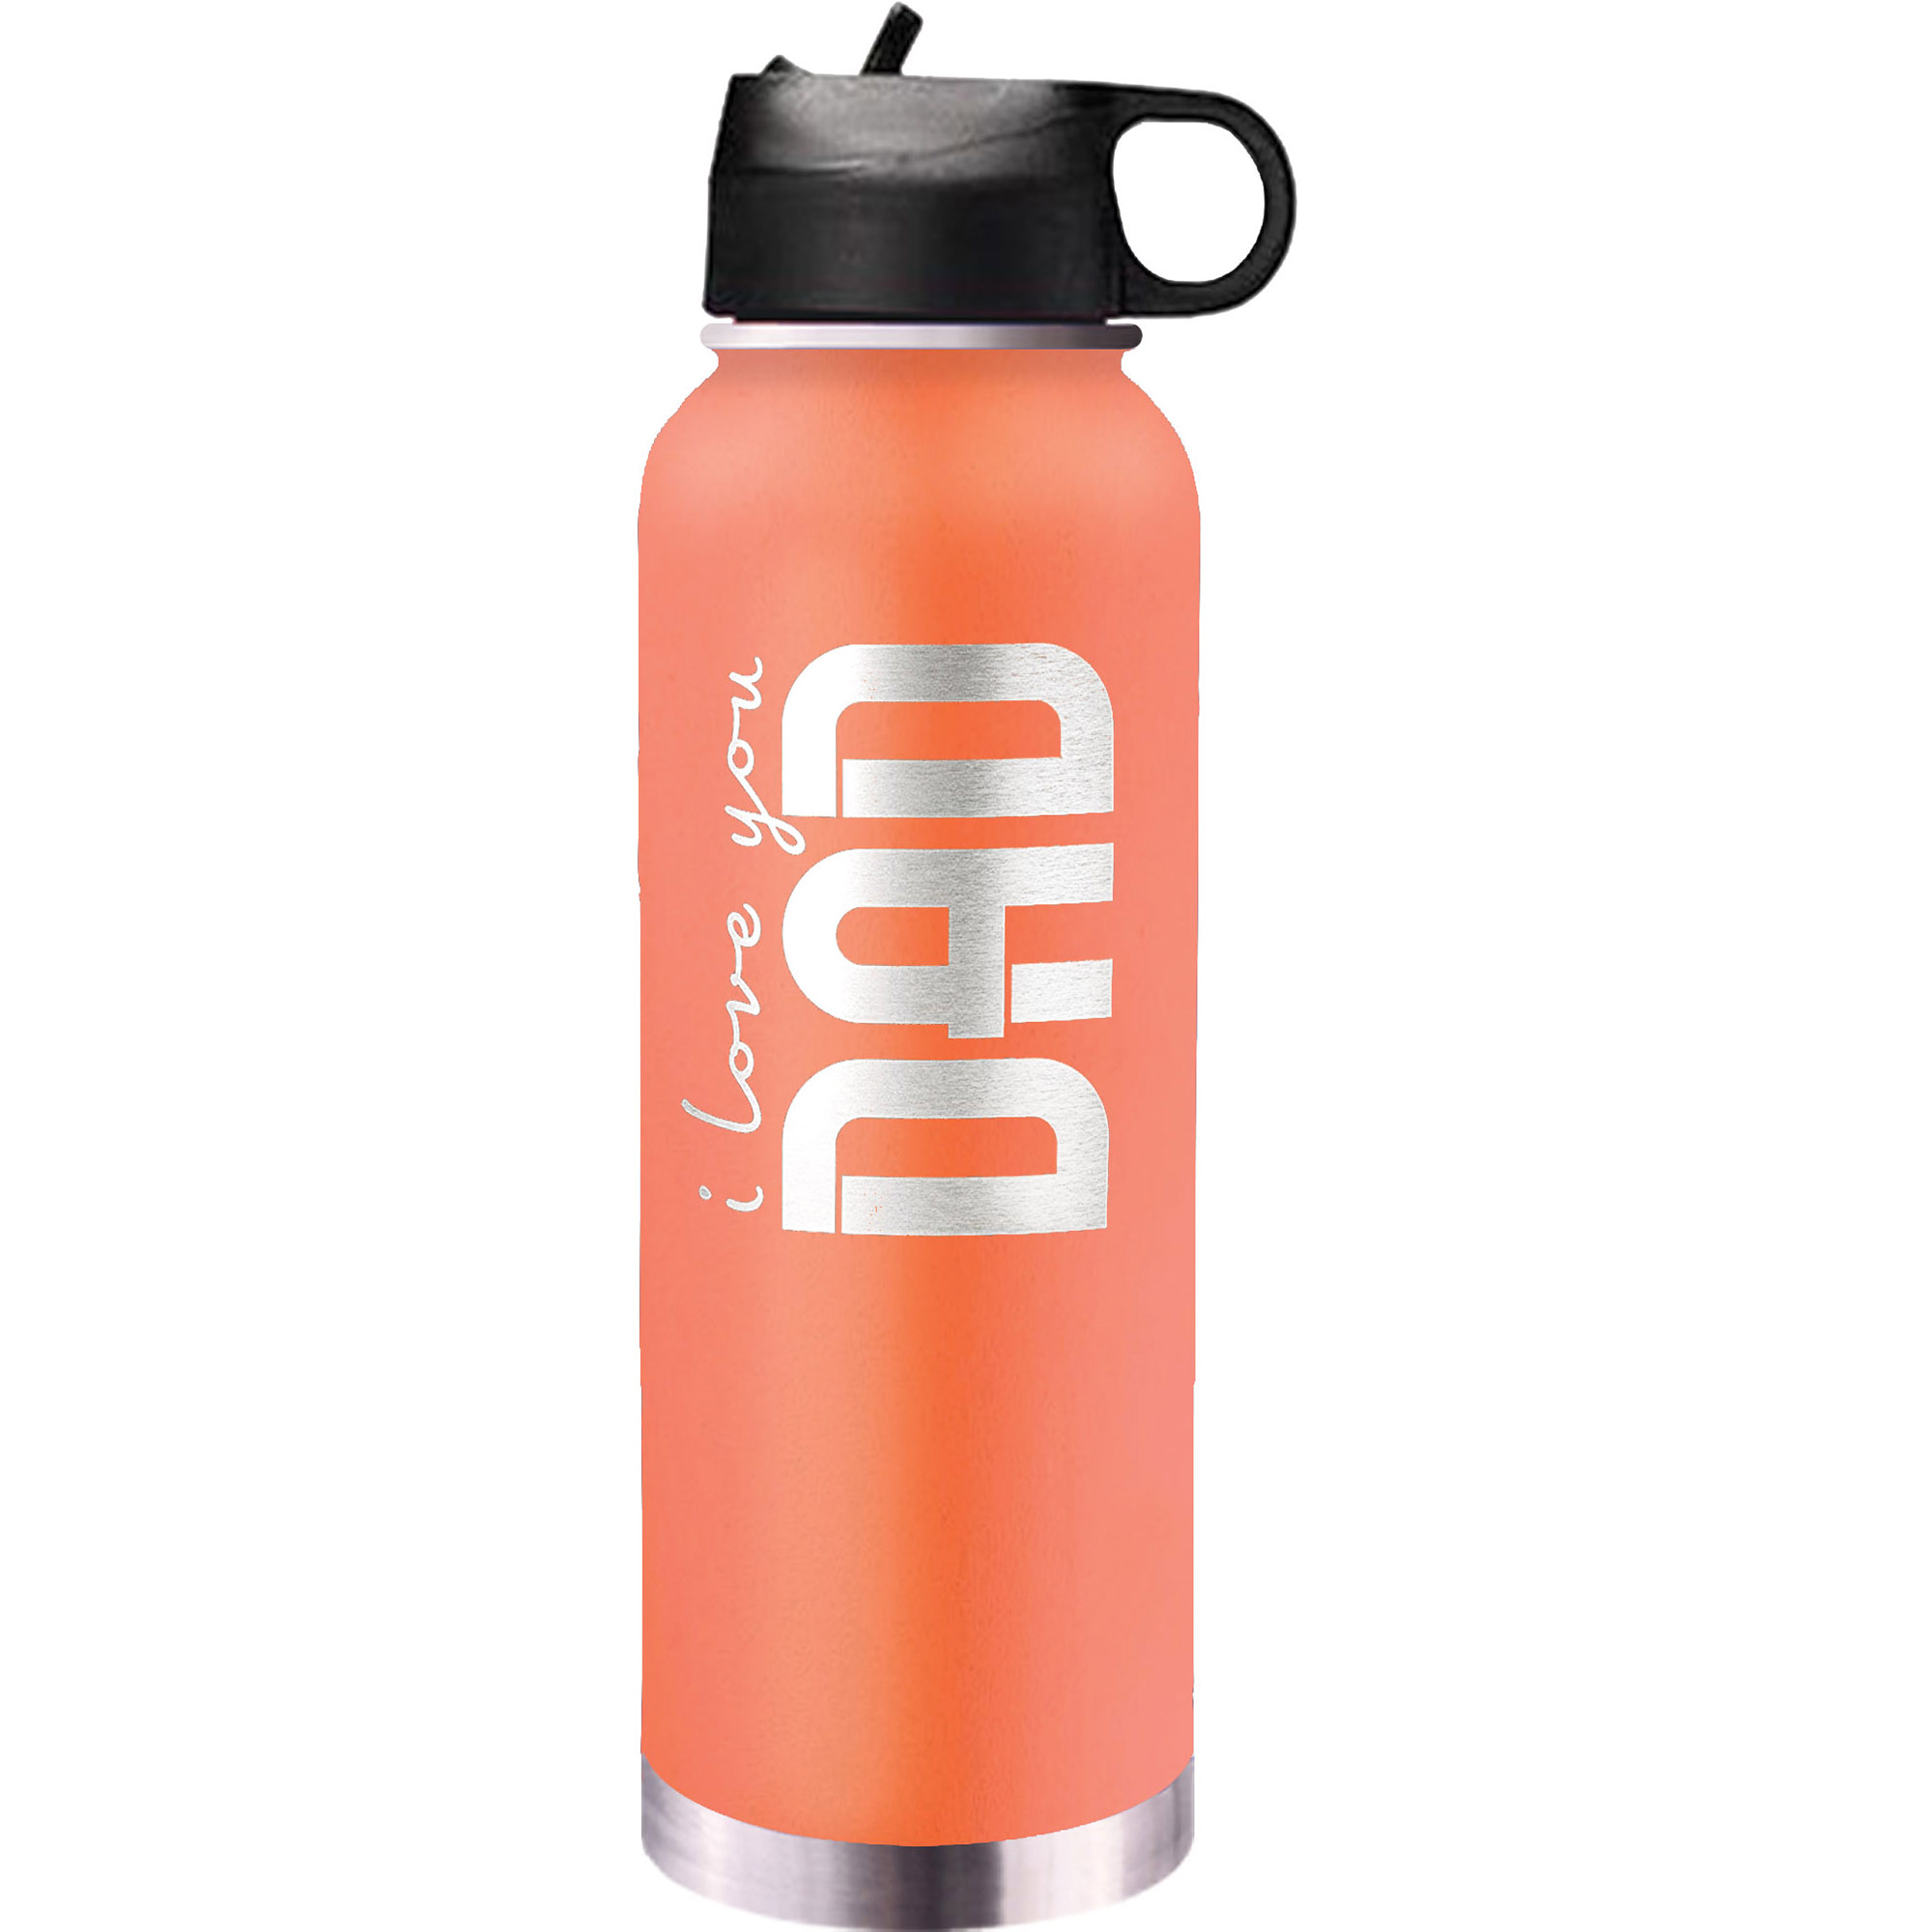 https://images.trophydepot.com/QC/images/products/Tahoe-32-oz-Waterbottle-TMLG17-ORG.jpg